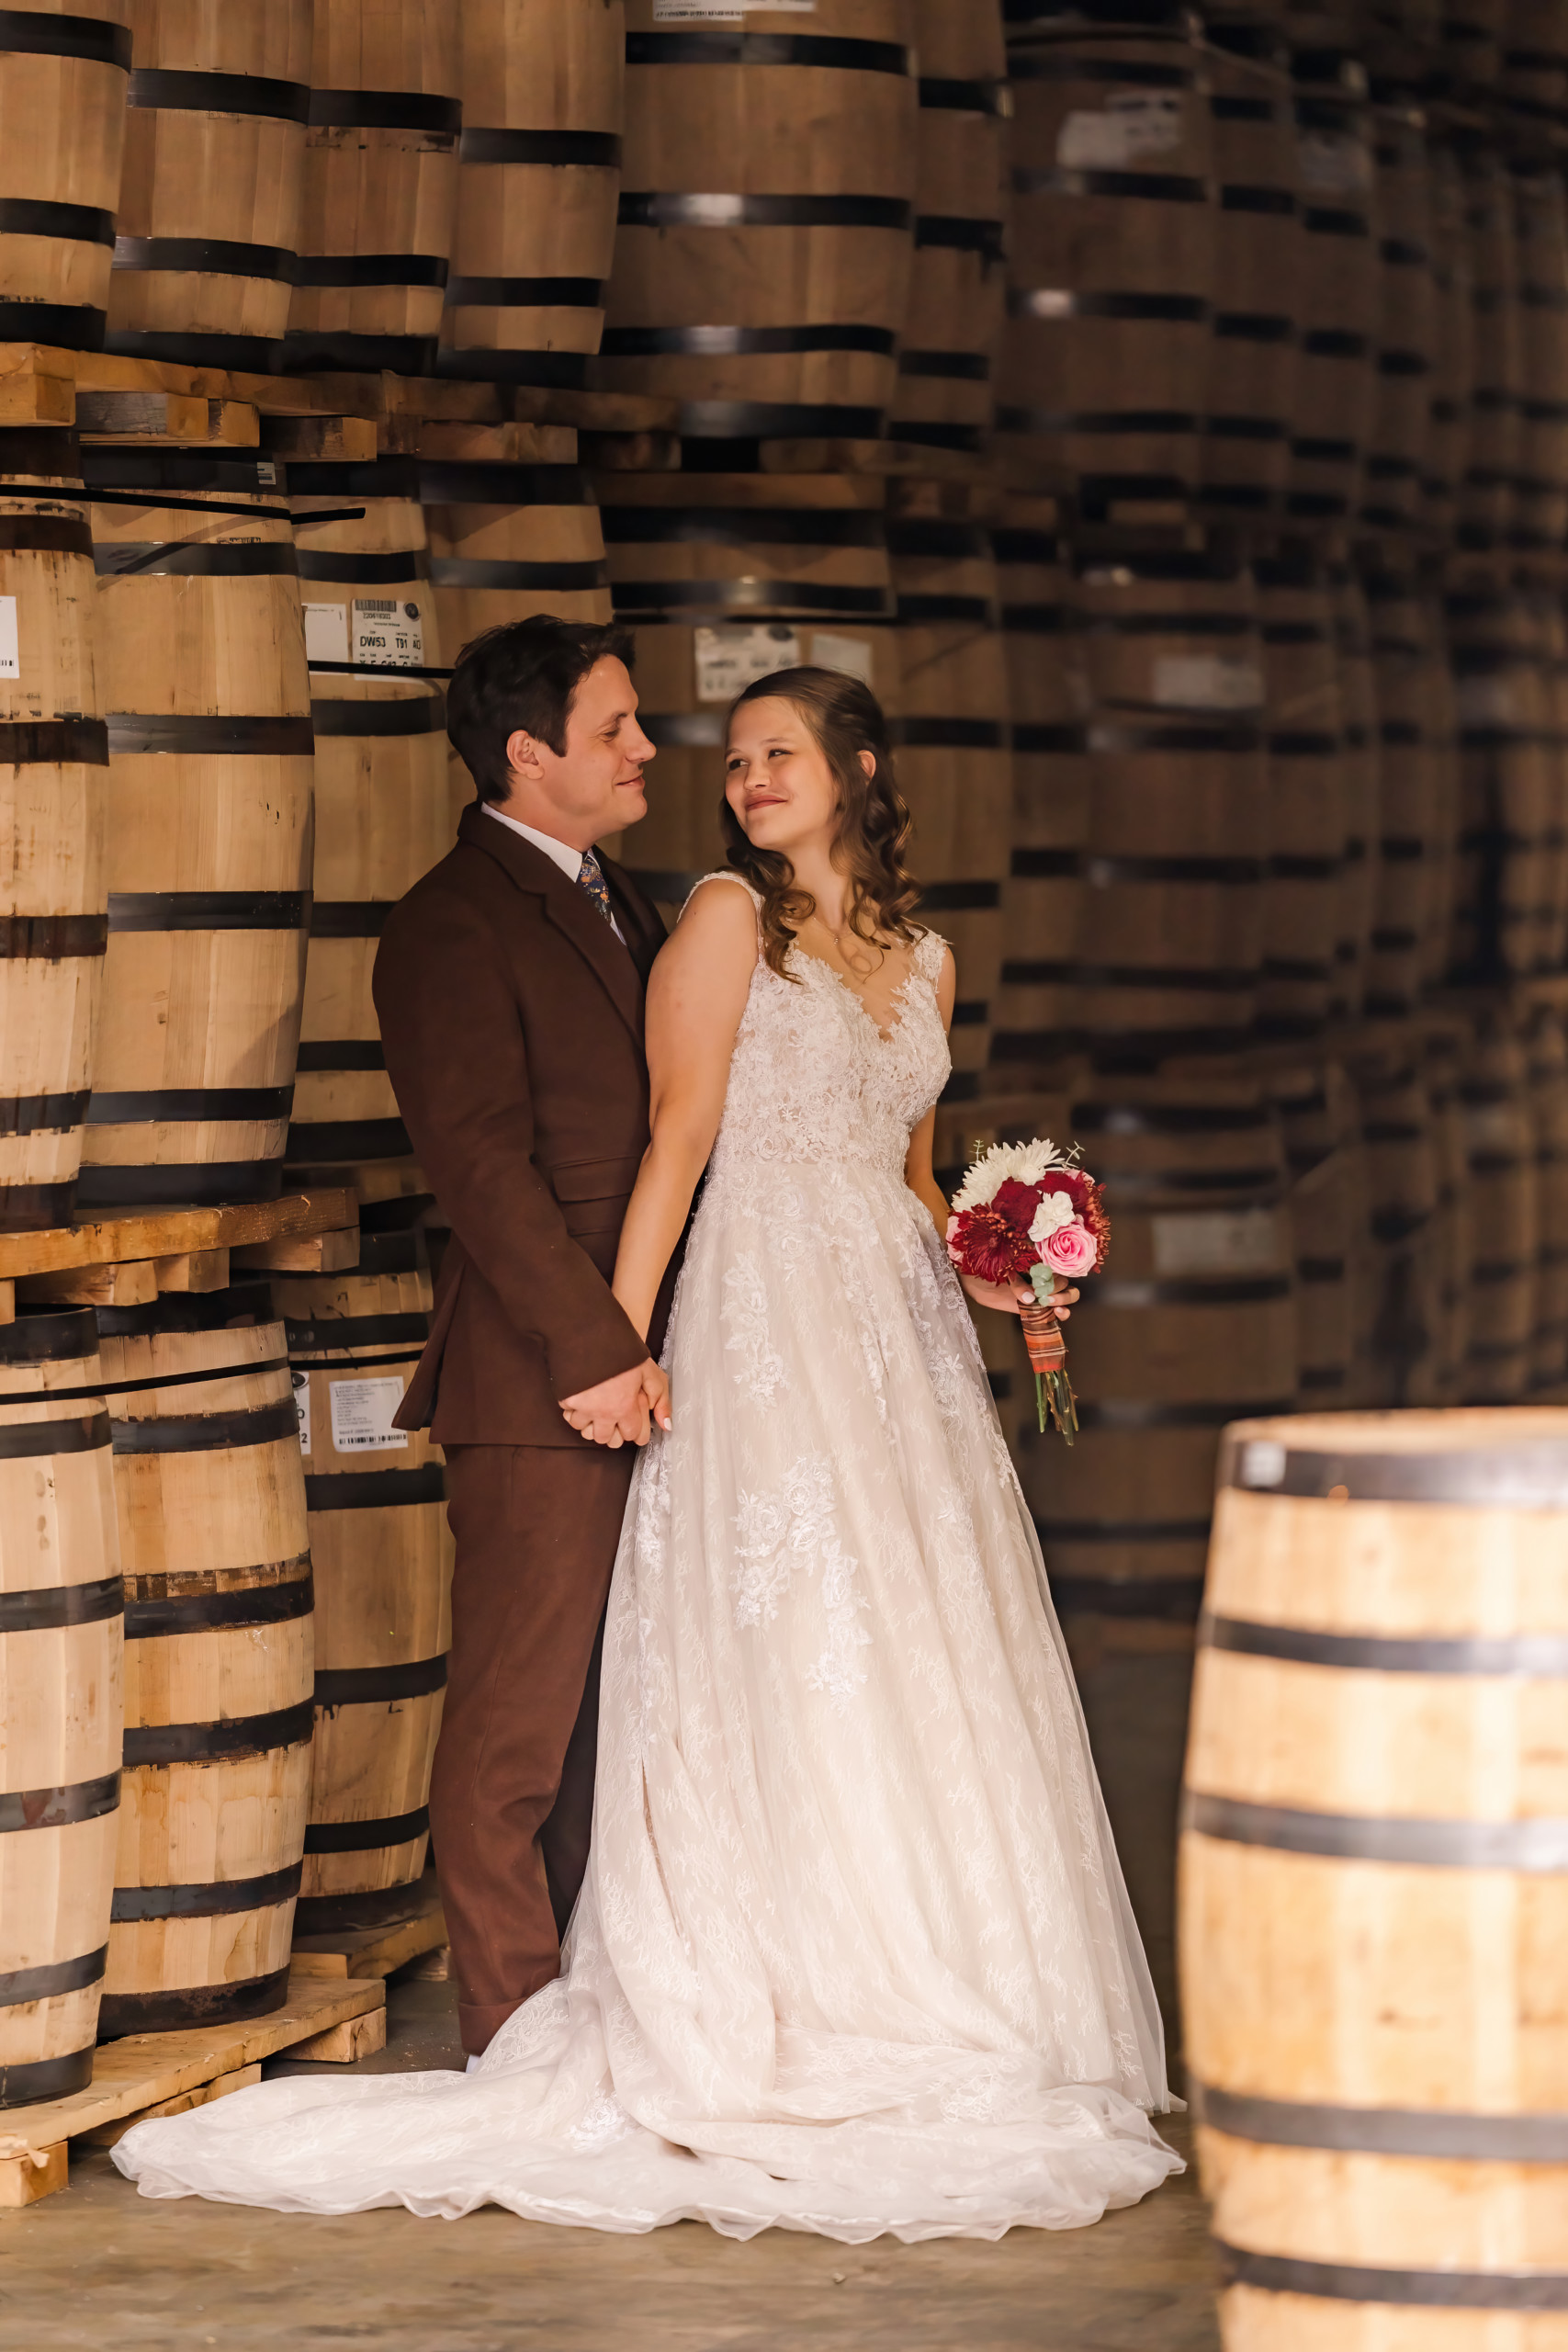 Chattanooga Whiskey Event Hall Bride and Groom